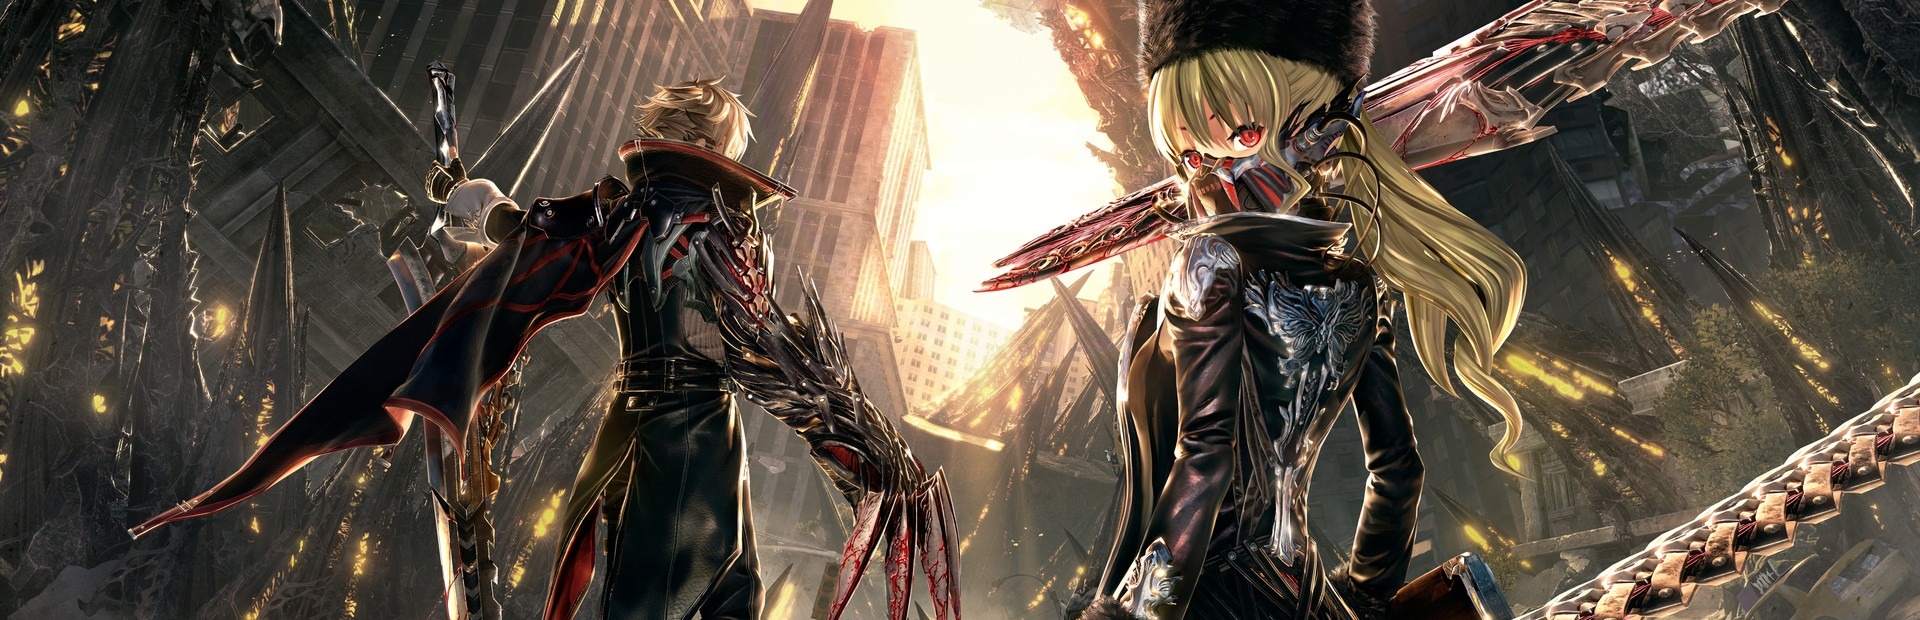 Prepare to Rise and Survive in Code Vein on Xbox One - Xbox Wire